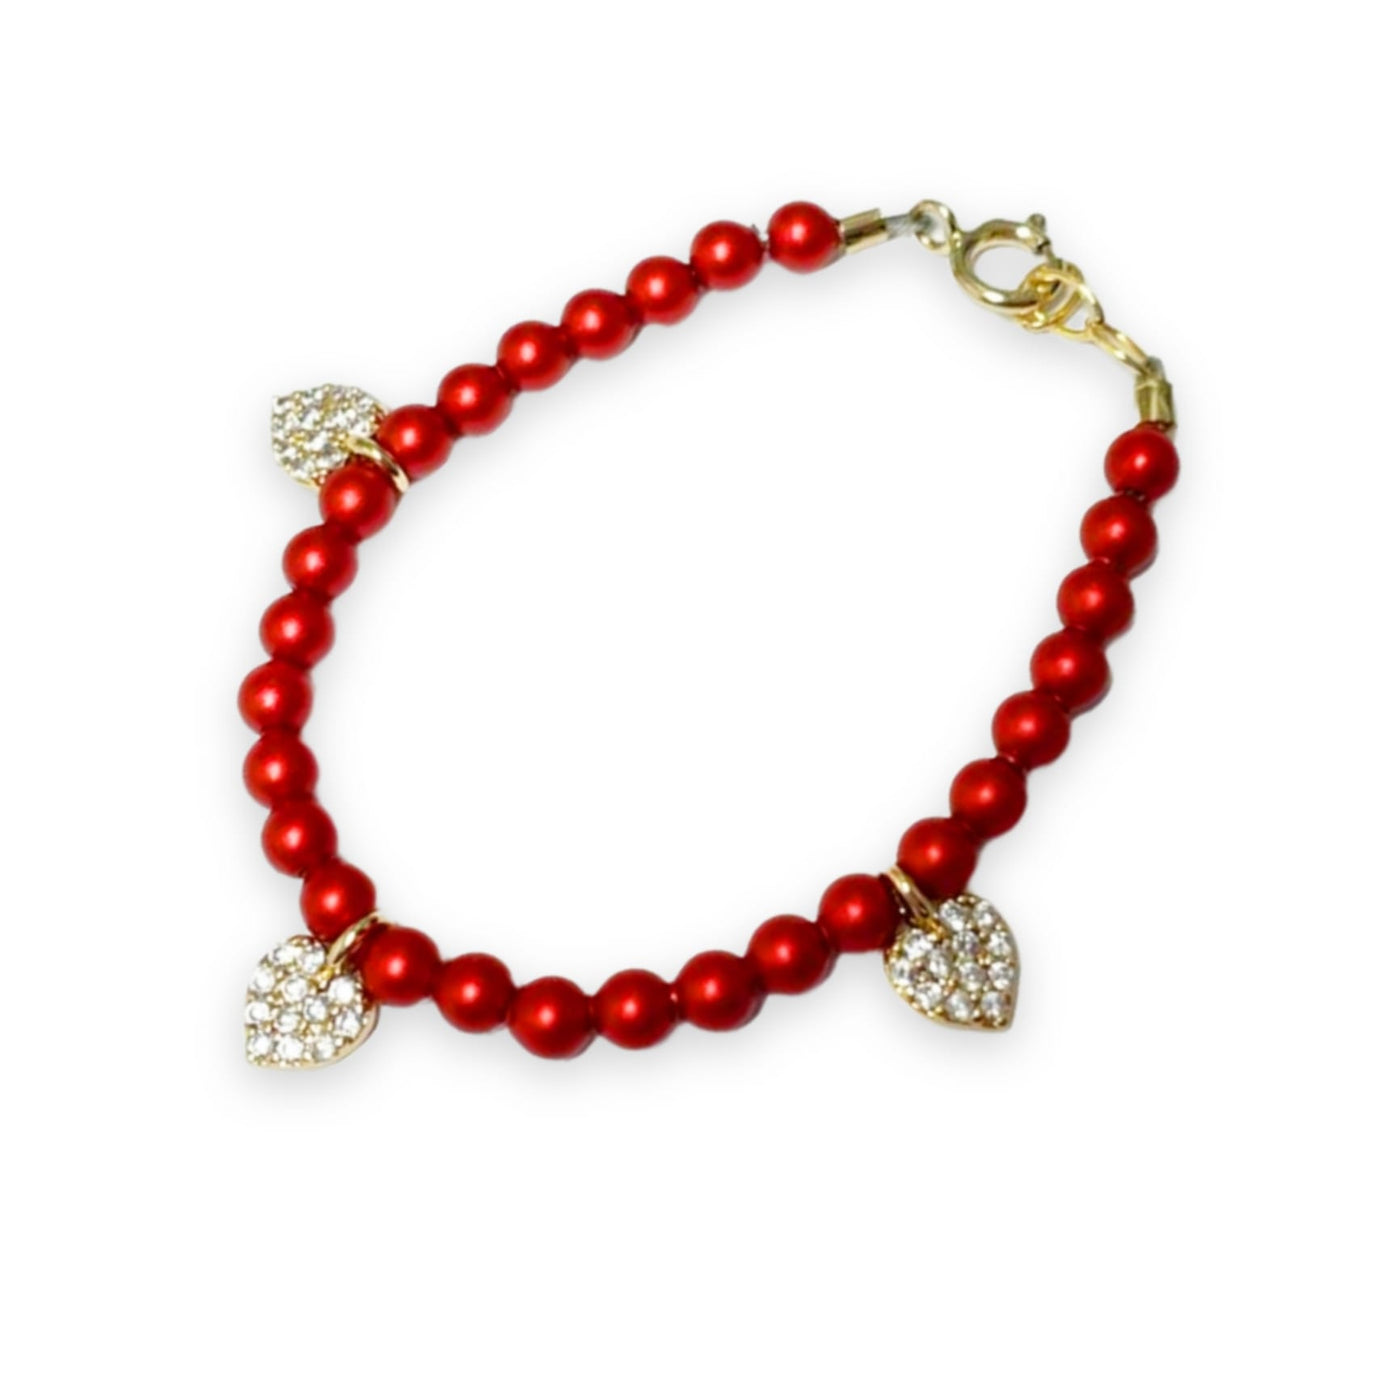 My Little Jewel Red Swarovski Pearl Beads with Heart Charms Bracelet